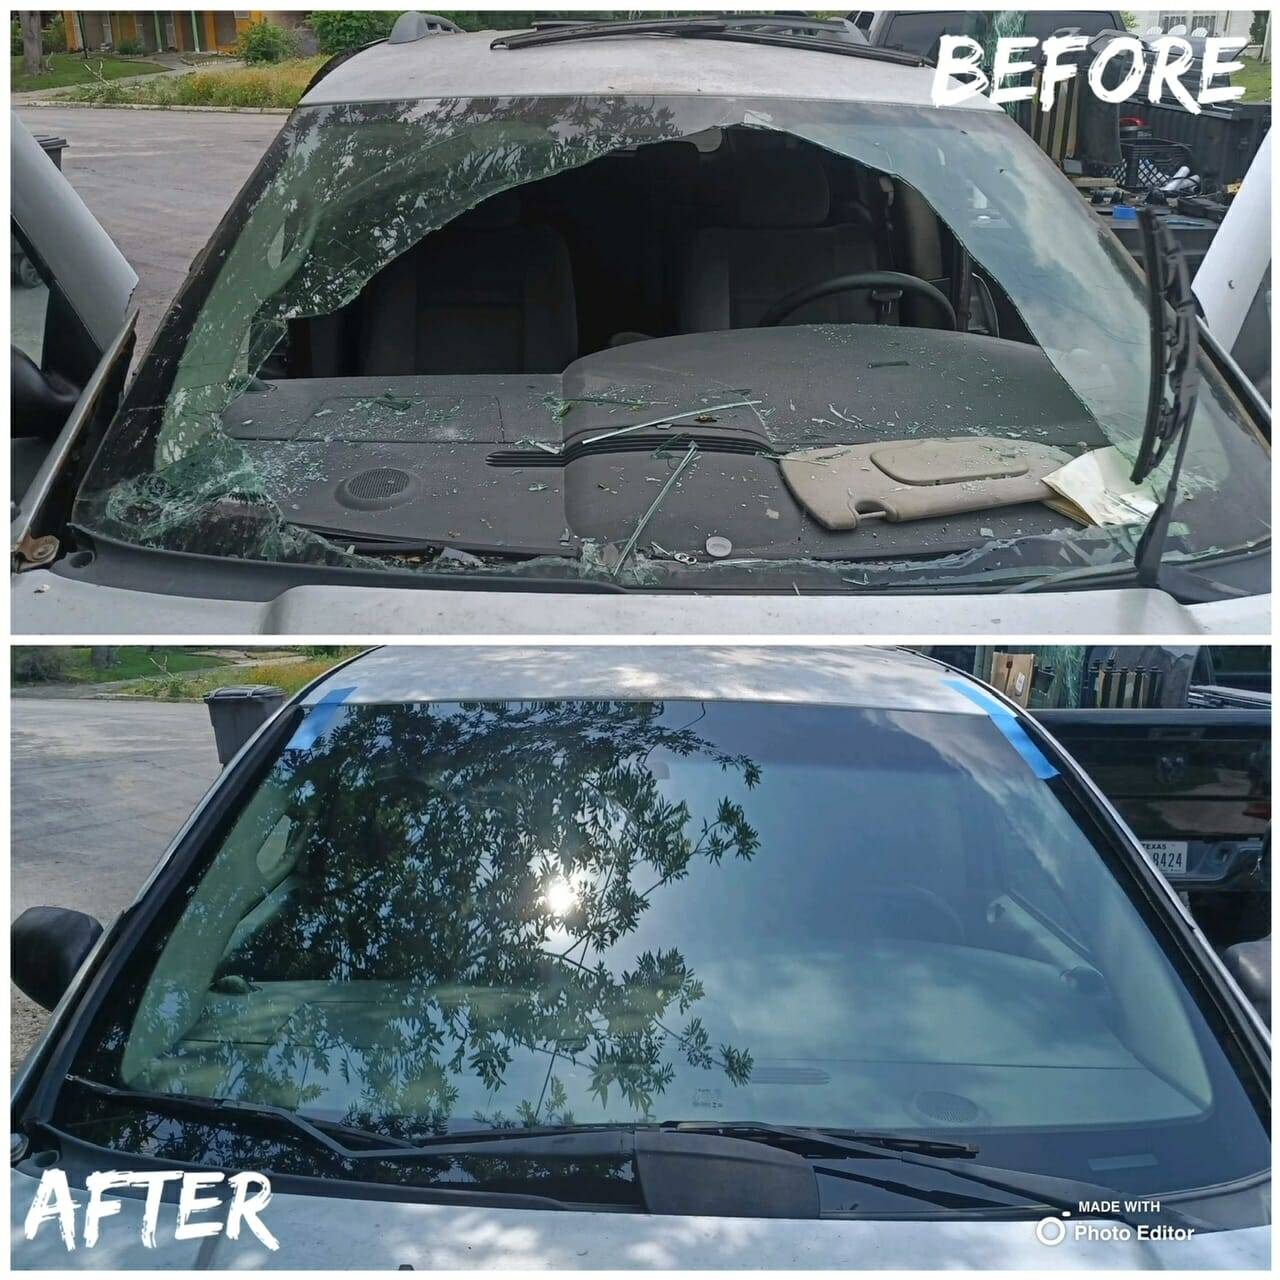 This striking split-image showcases our quality workmanship in North San Antonio, Texas. The top half displays the severe damage to a sedan's front windshield, completely broken and caved in due to a harsh storm. The lower half presents the same vehicle after our technicians performed a complete windshield replacement. Despite the extreme weather condition that caused the initial damage, our dedicated home auto glass service ensures the vehicle is now as good as new and ready to face the elements again.